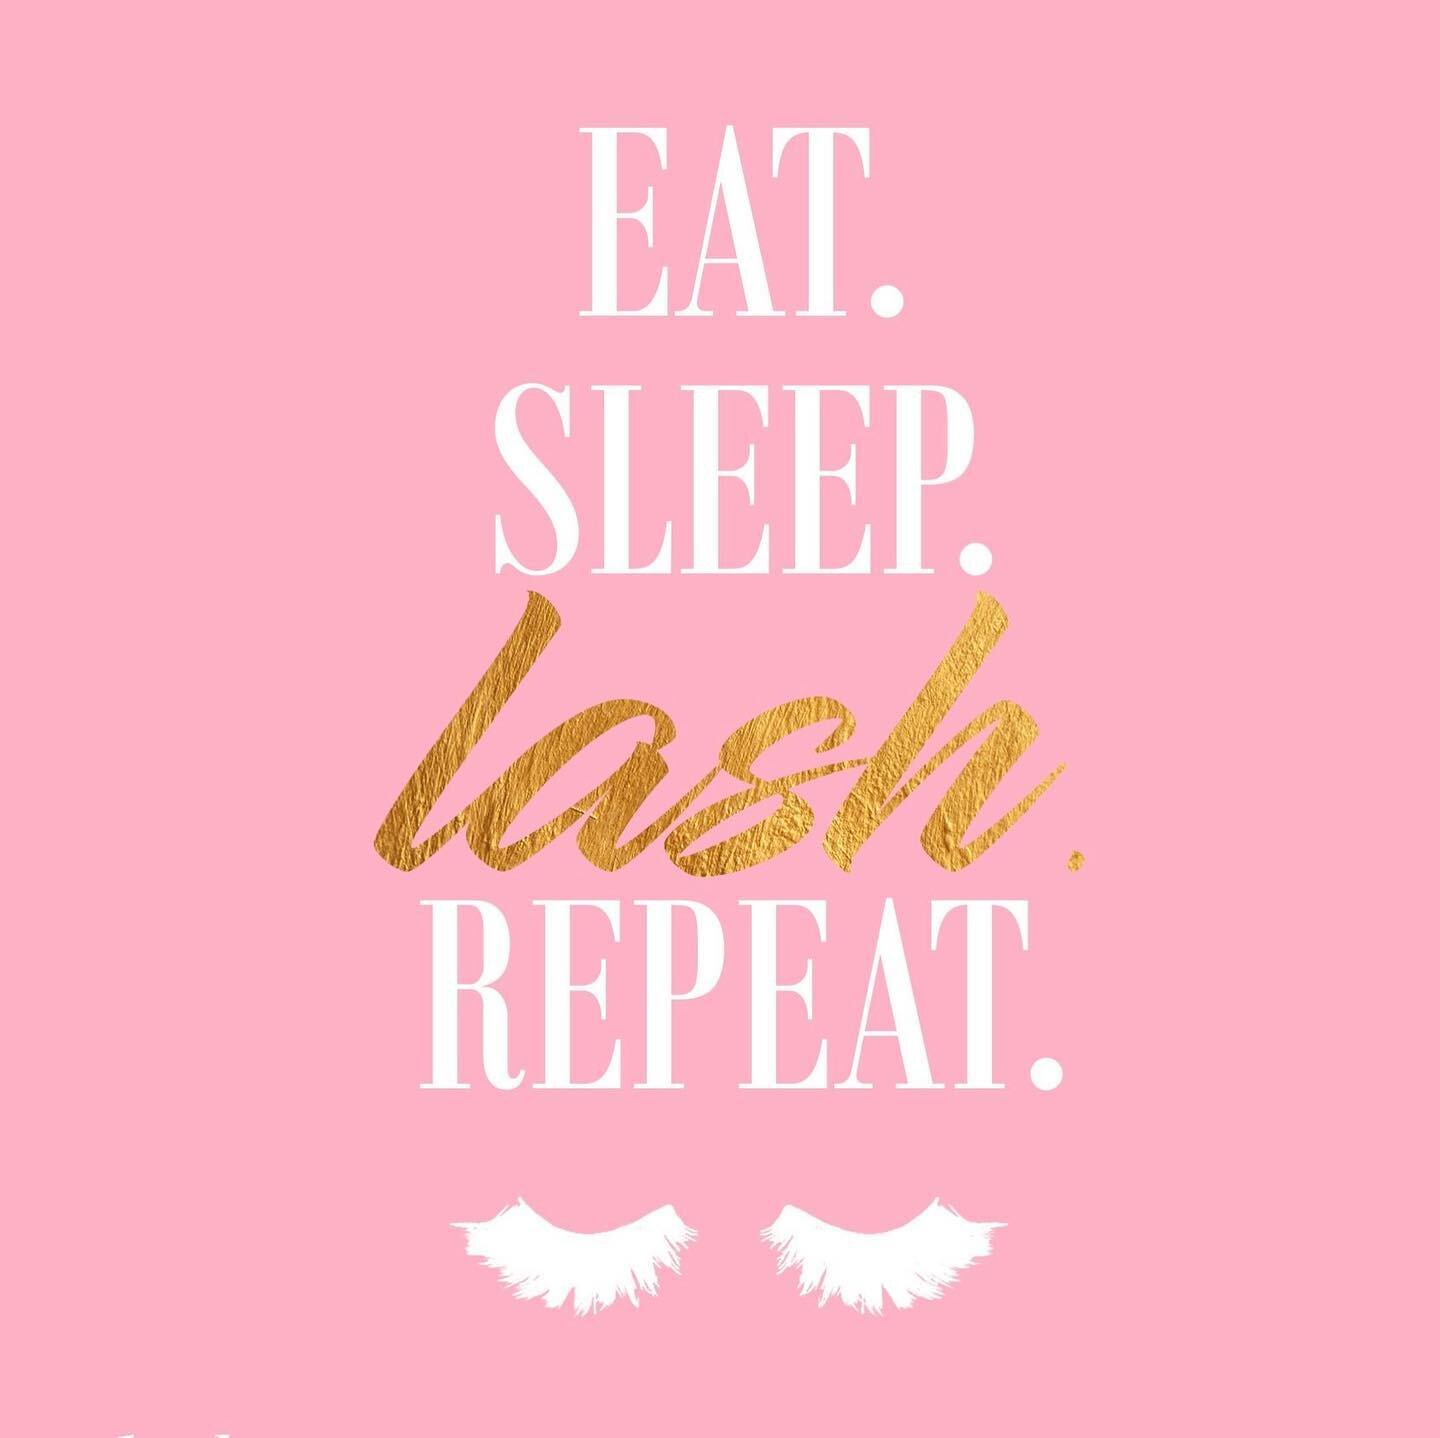 Everyday is a lash day @hashtagglam__ 
.
.
Pre-book now to take advantage of our exclusive holiday pricing. 
www.glamstudiocorp.com
.
.
#stalbertlashes #stalbert #northwestedmonton #yegspa #xmasvibes #holidayseason